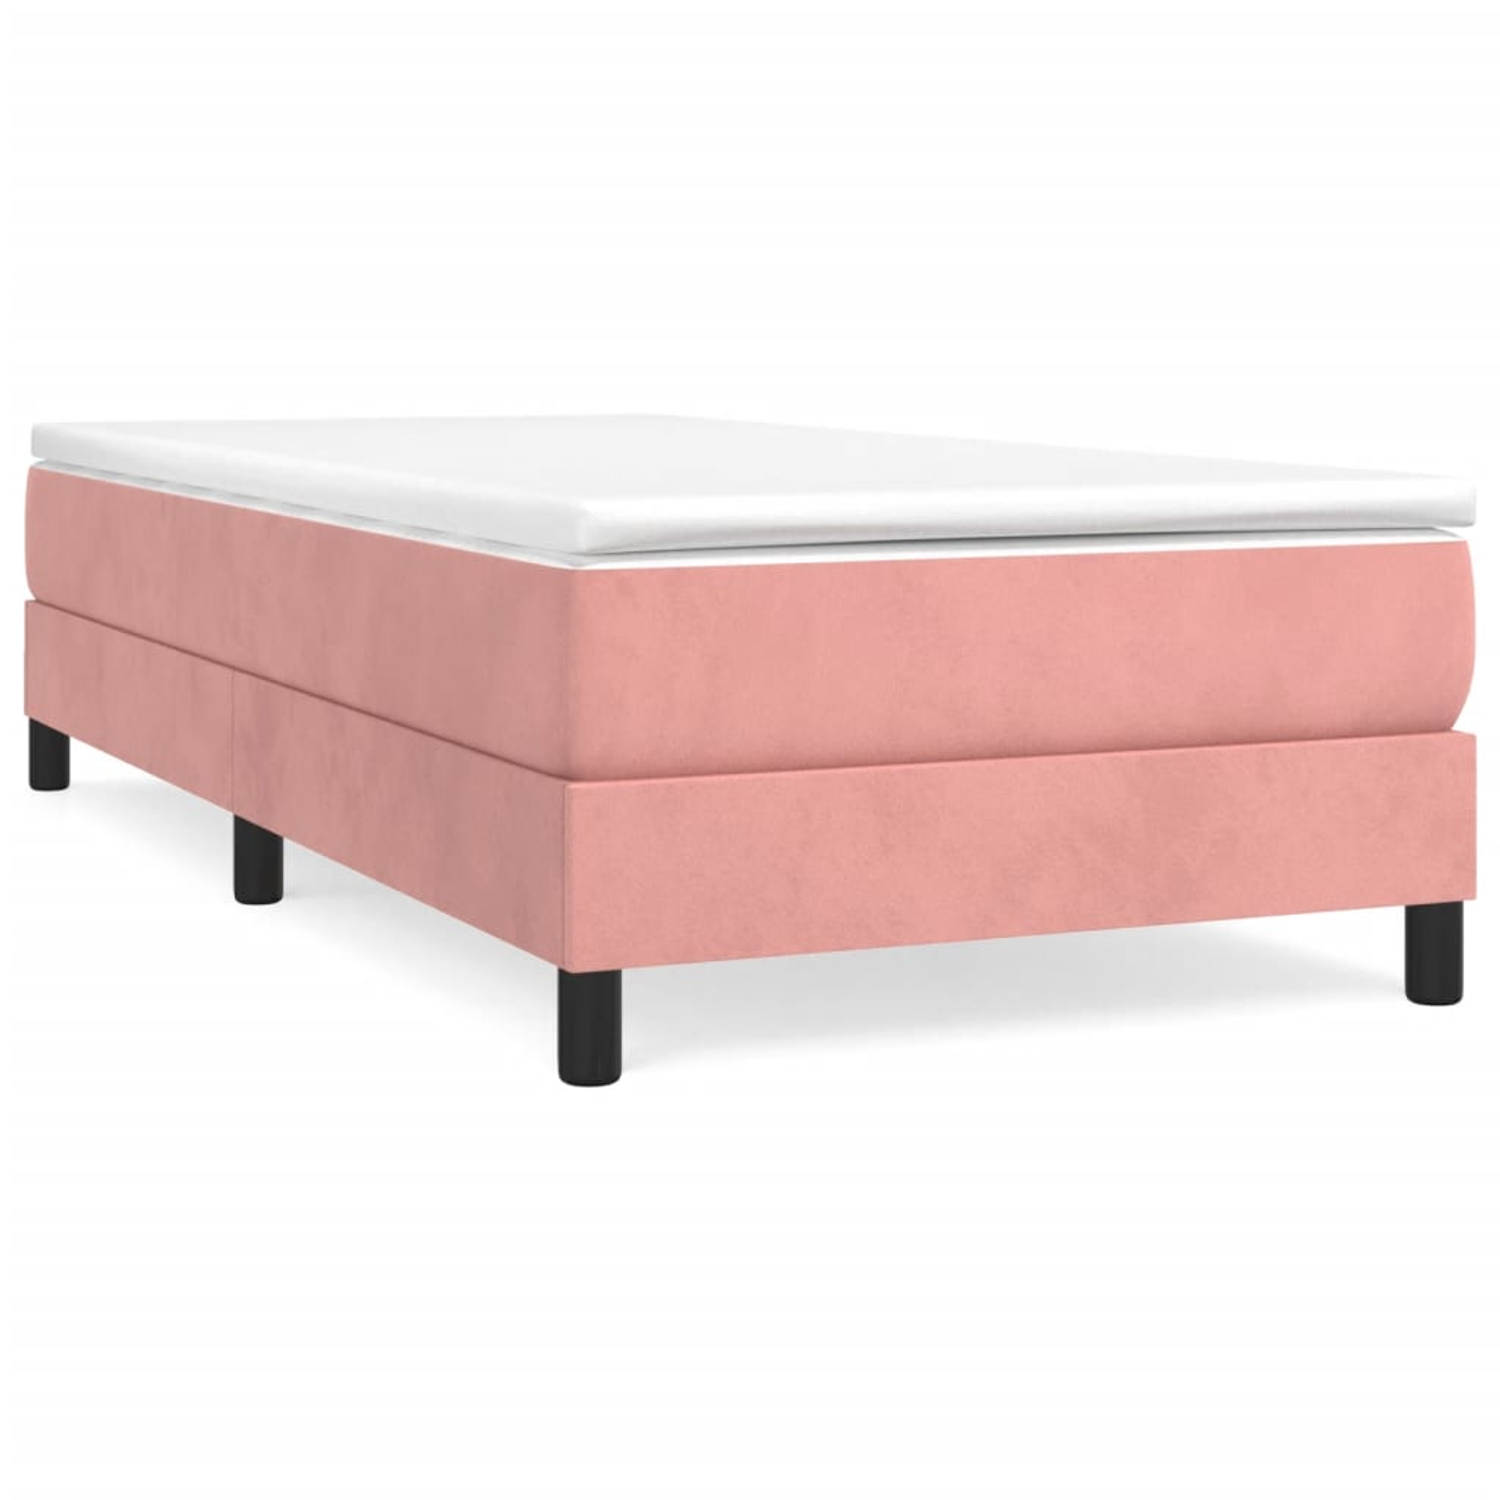 The Living Store Boxspringframe fluweel roze 80x200 cm - Bed